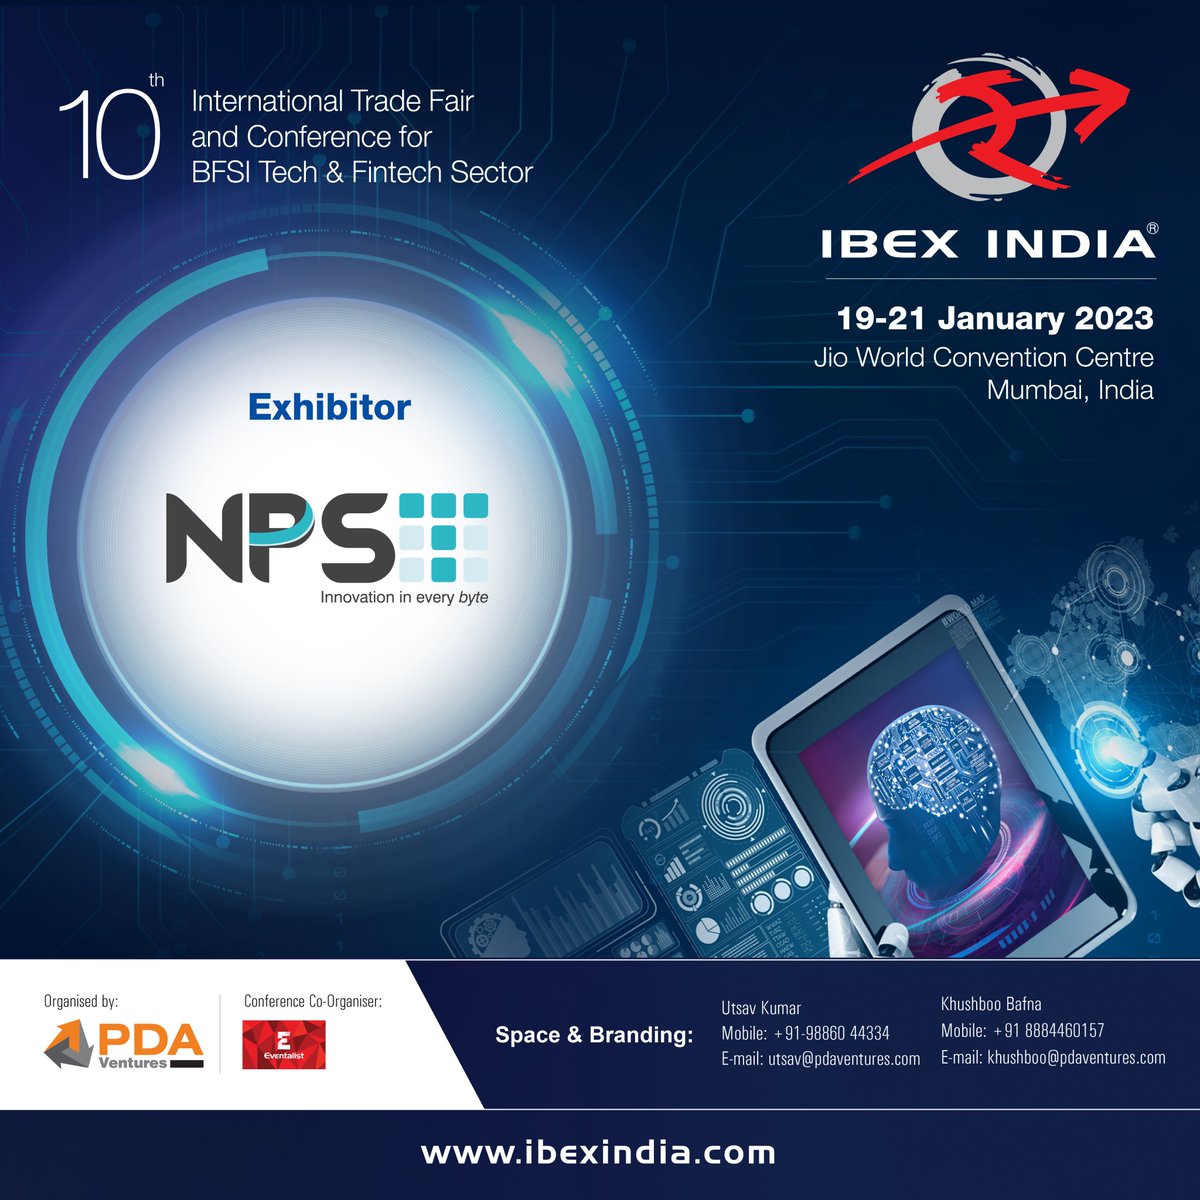 IBEX India 2023 is delighted to welcome on board NPST as an Exhibitor

#IbexIndia #banking #tradefair #conference #bankingevent #bankingtechnology #technology #events #support #india #financialservices #BFSITech #event2023 #mumbai #fintech #bfsi #bankingtrends